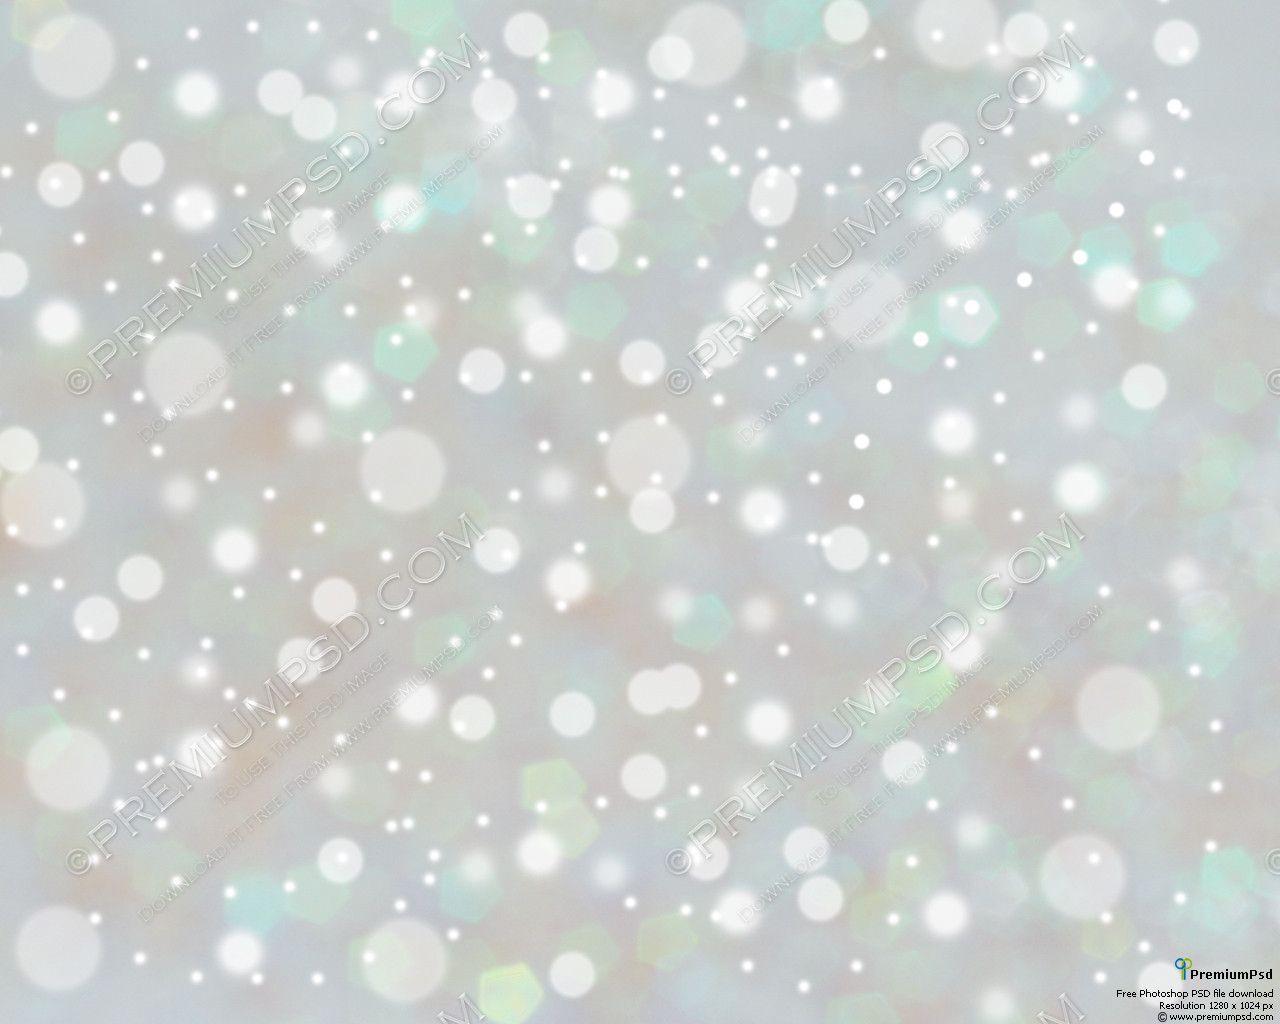 Wallpaper For > Sparkly Background For Powerpoint